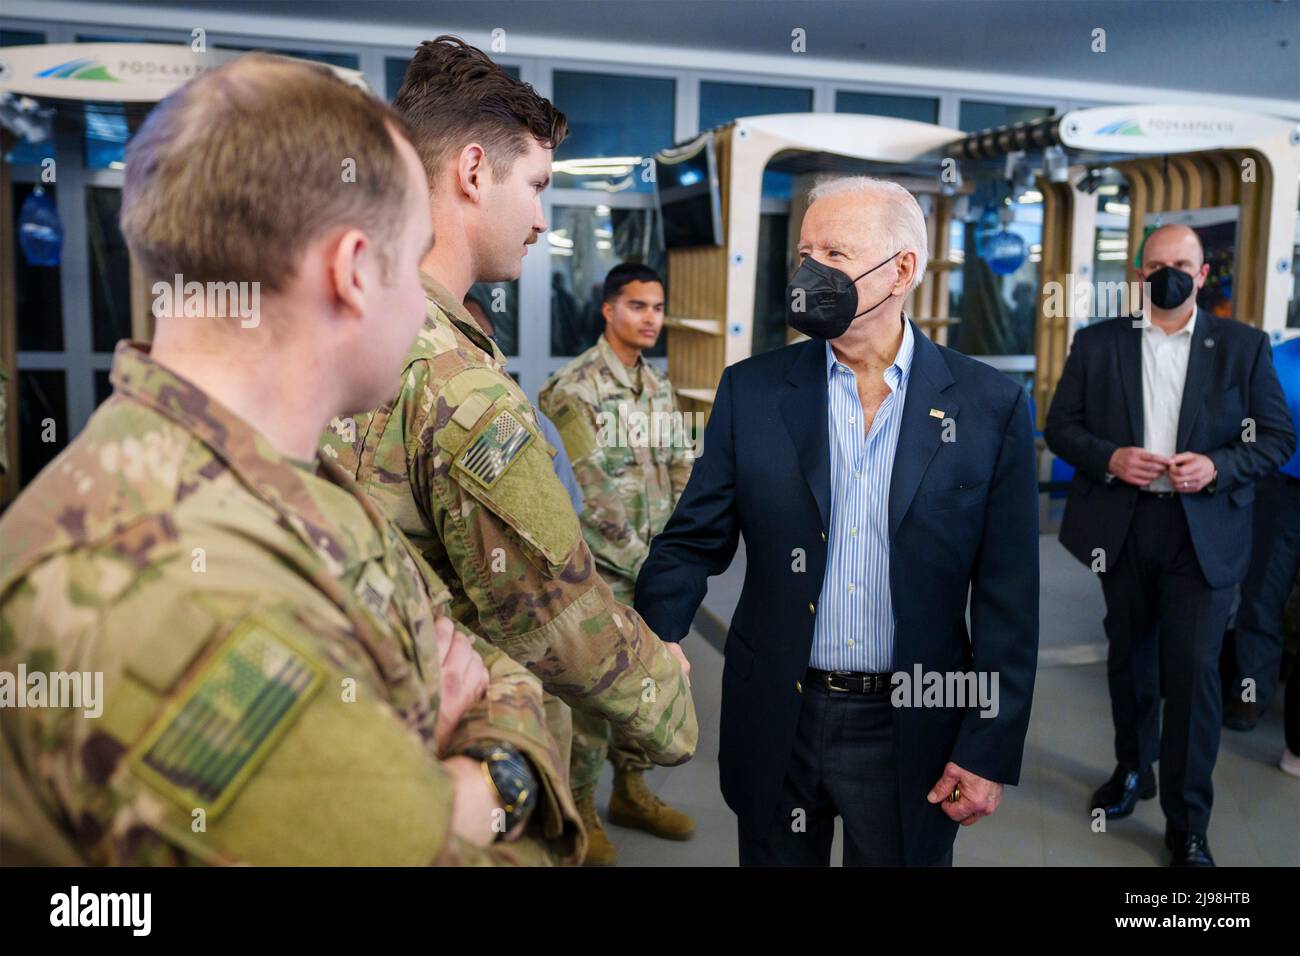 Rzeszow, Poland. 25 March, 2022. U.S President Joe Biden, greets members of the U.S. Army 82nd Airborne Division at the G2A arena, March 25, 2022 in Jasionka, Poland.  Credit: Adam Schultz/White House Photo/Alamy Live News Stock Photo